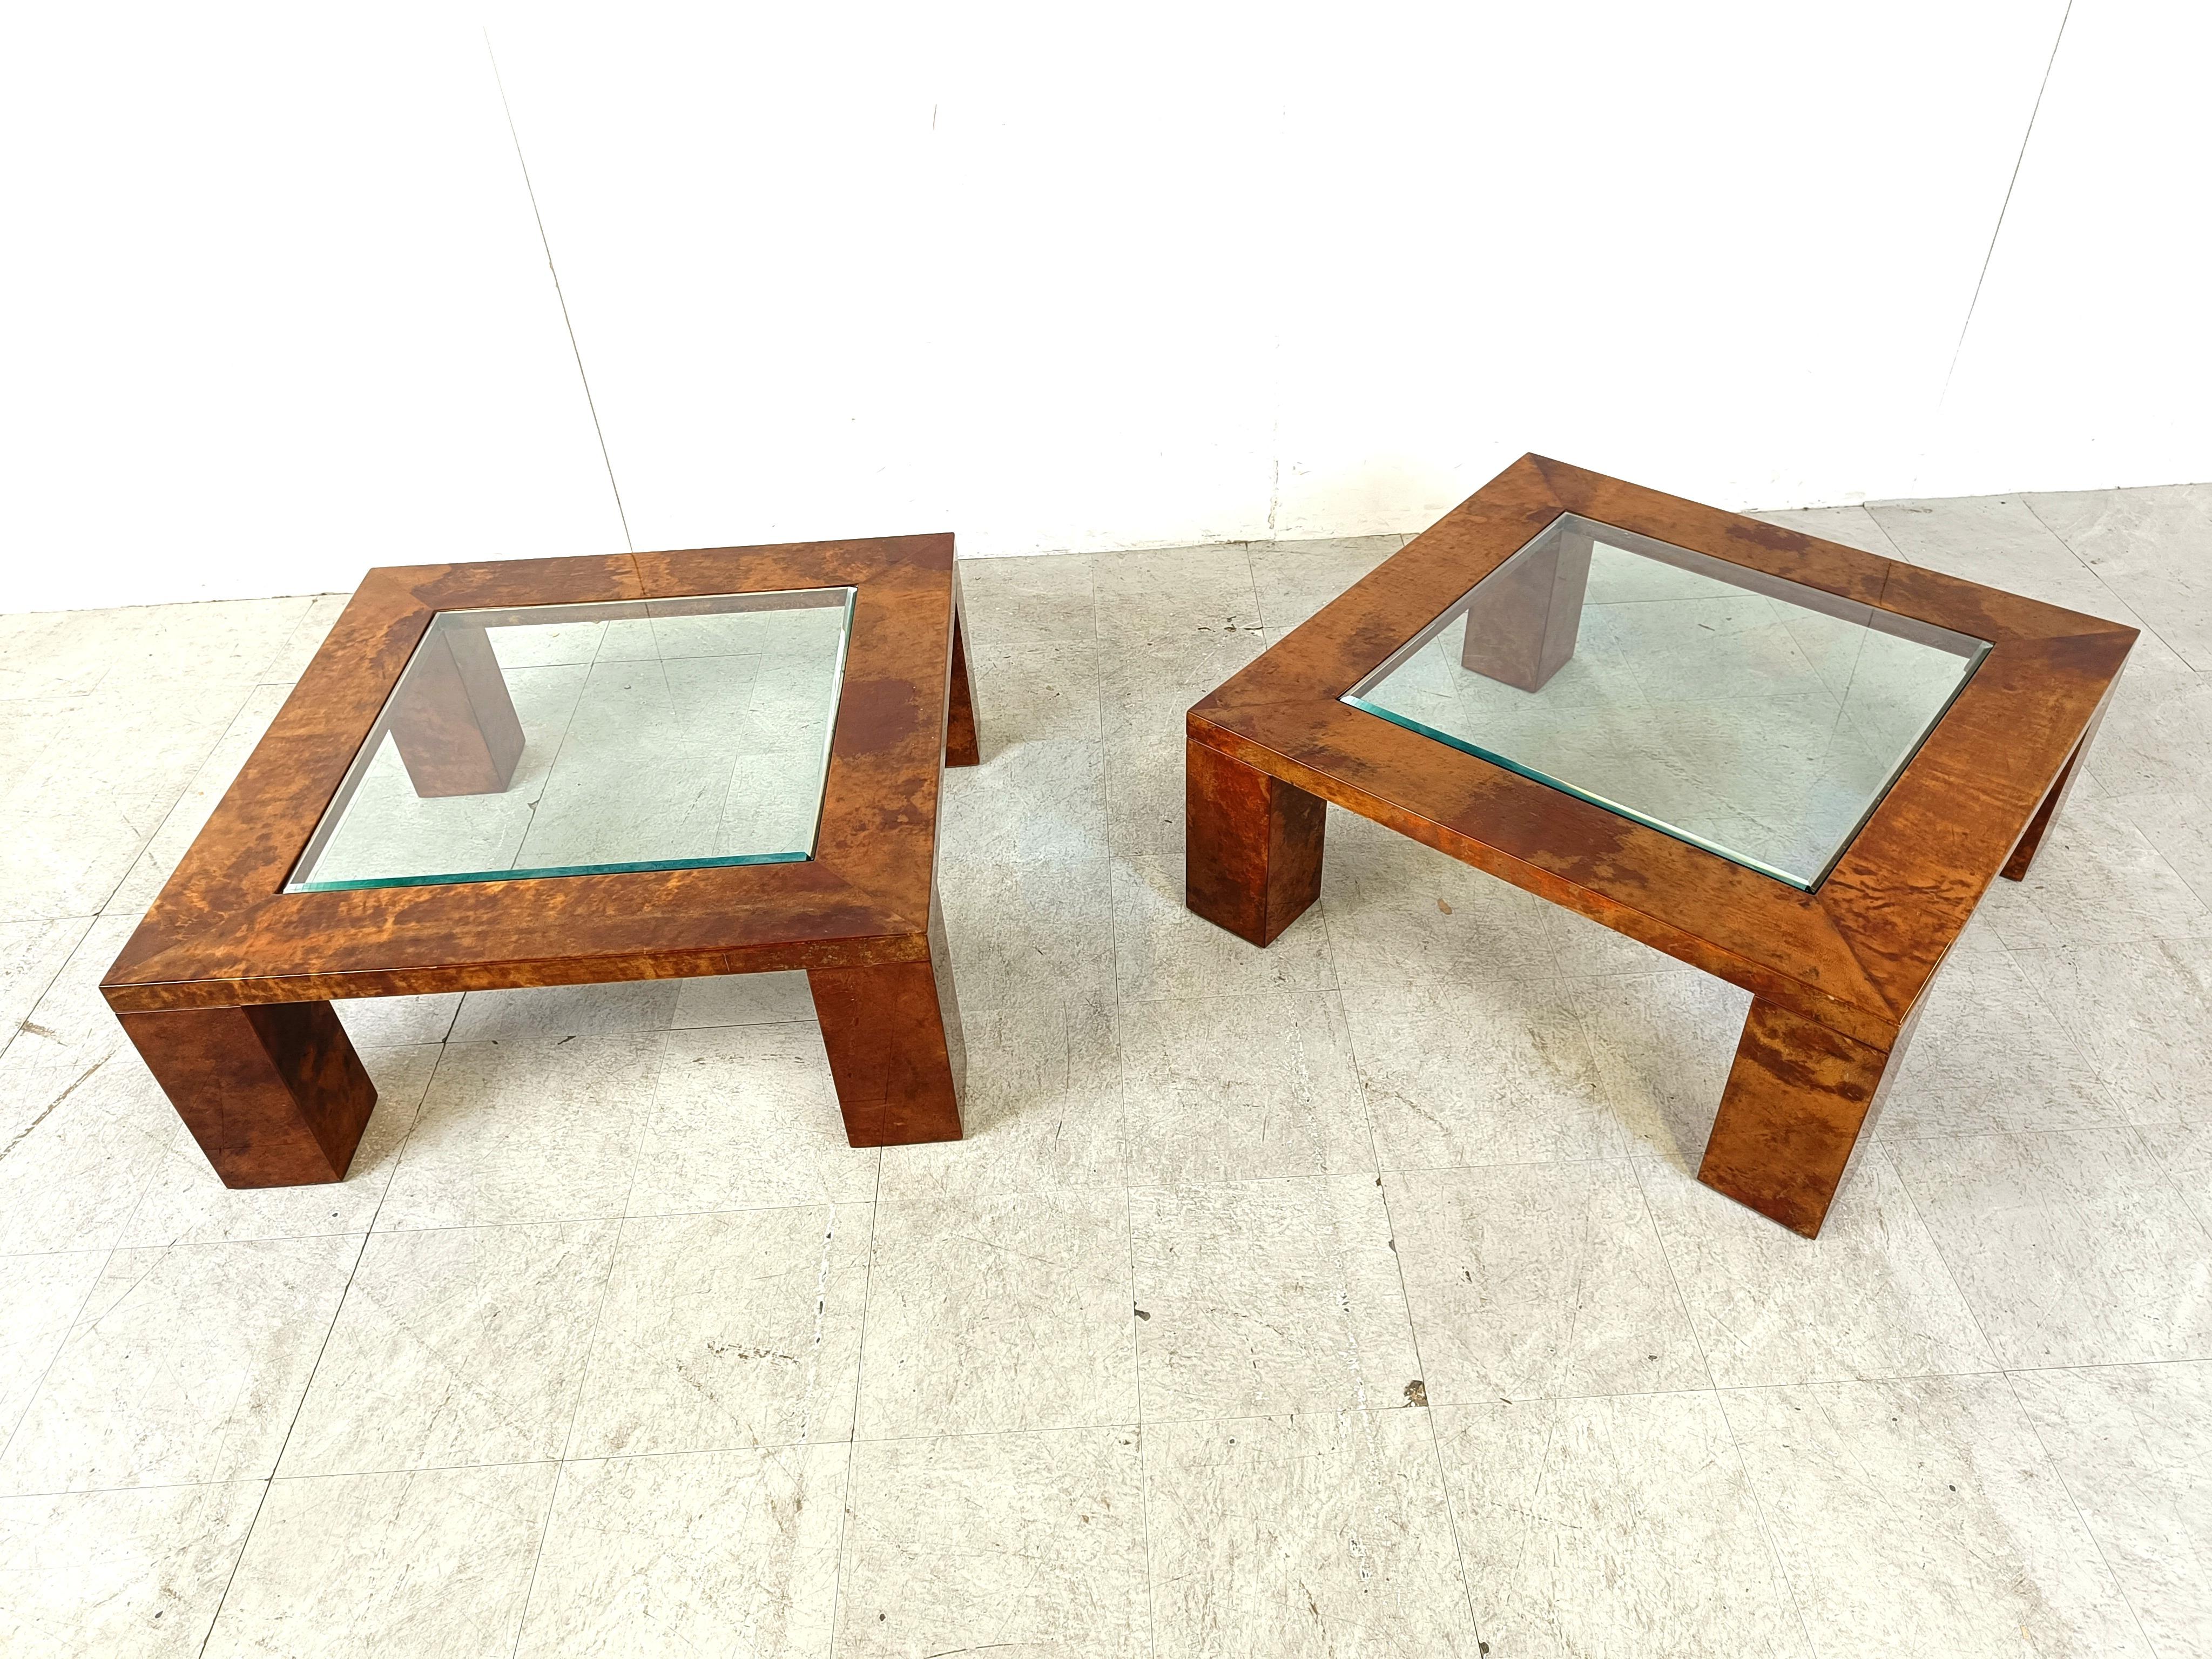 Aldo Tura Lacquered Goatskin Coffee Tables, 1960s - set of 2 In Good Condition For Sale In HEVERLEE, BE